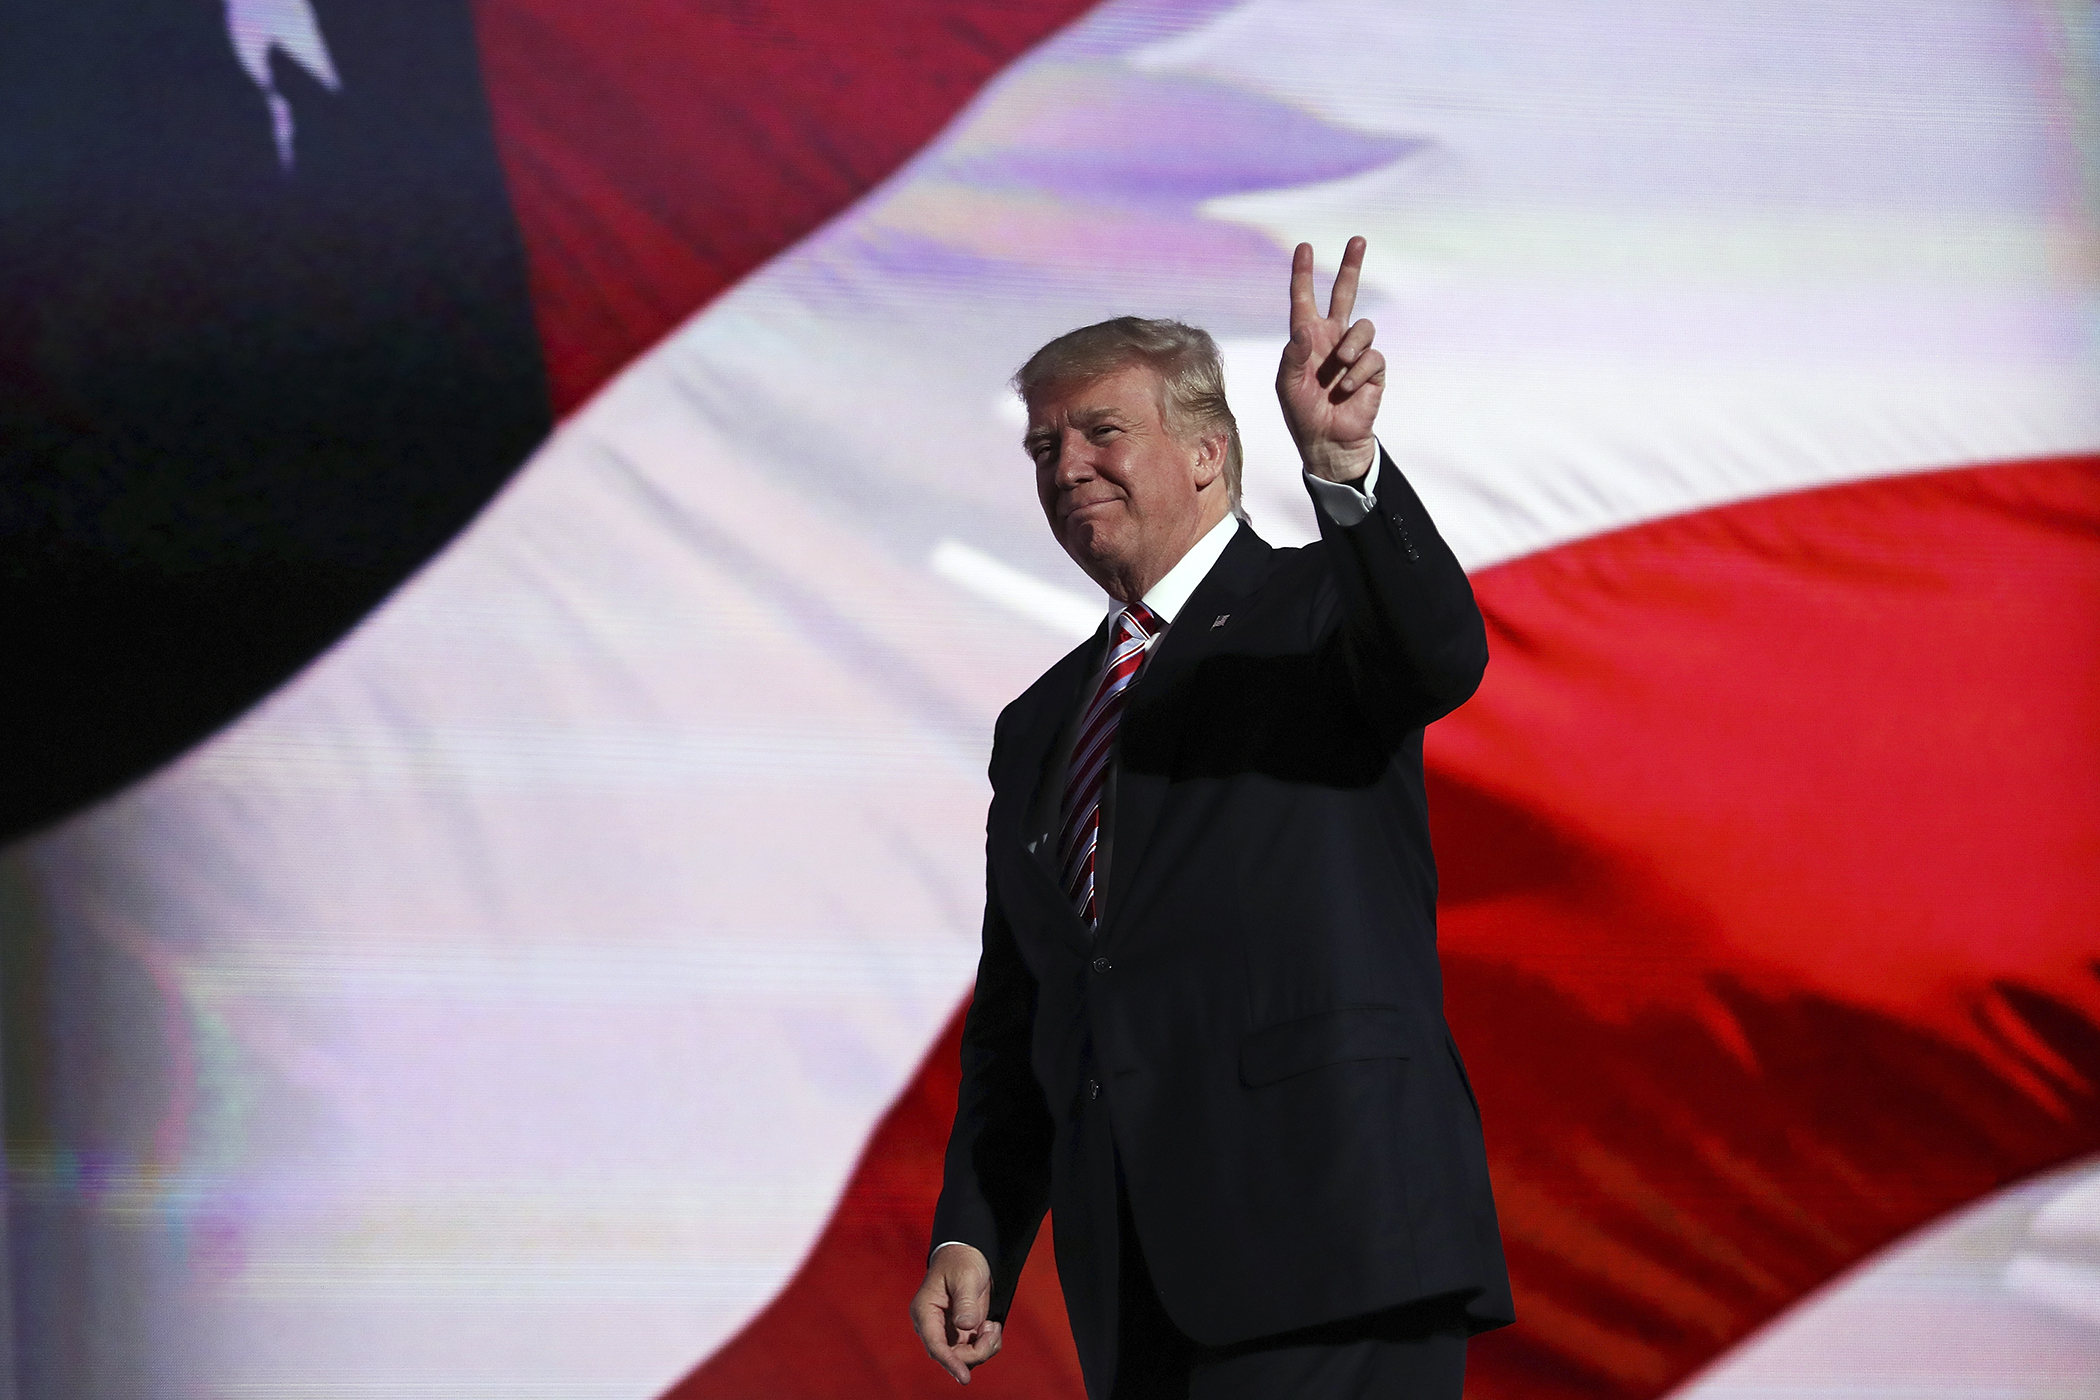 Republican presidential candidate Donald Trump gestures after Republican vice presidential candidate Mike Pence delivered his speech on the third day of the Republican National Convention on July 20, 2016 at the Quicken Loans Arena in Cleveland, Ohio.